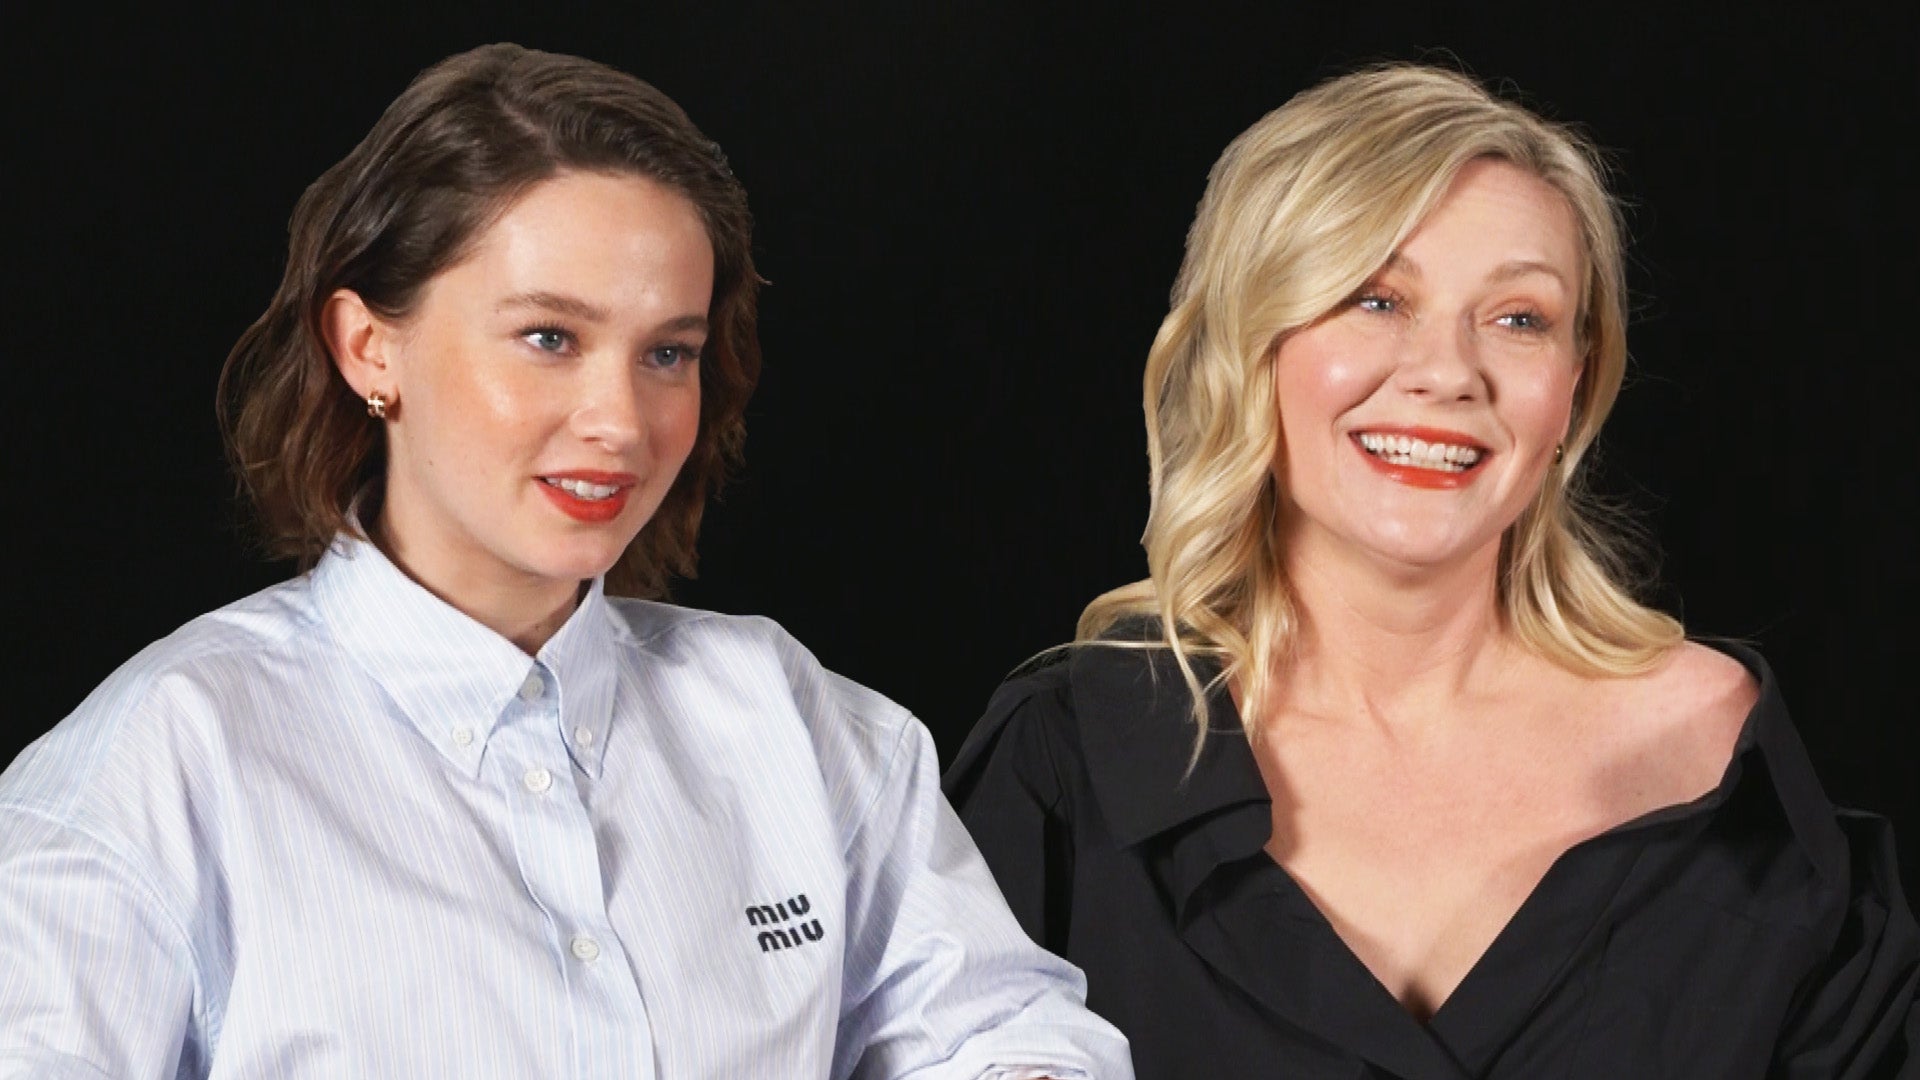 Kirsten Dunst REACTS to Co-Star Cailee Spaeny's Heartwarming Reveal